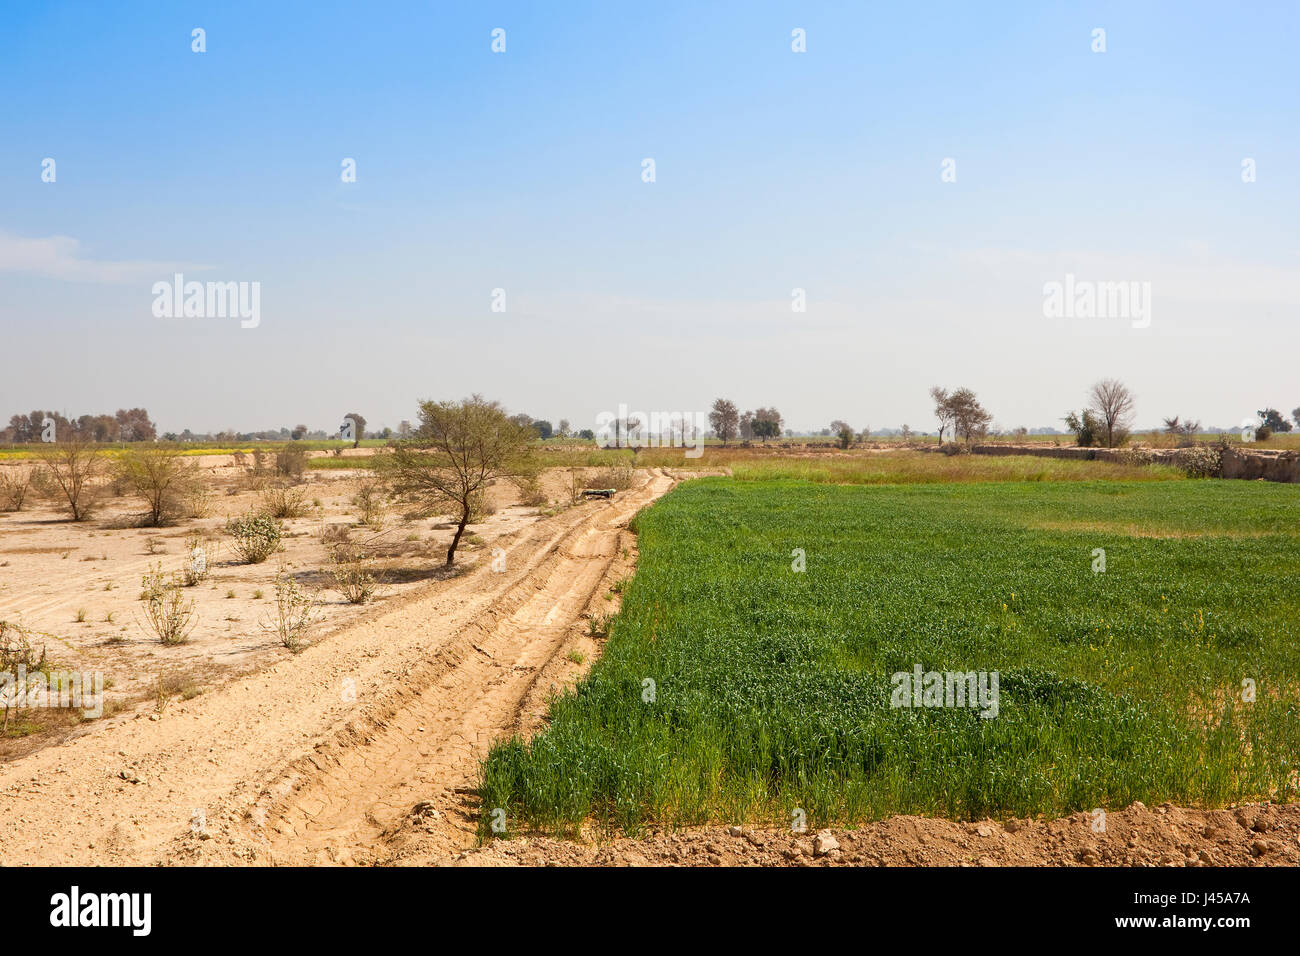 Arid Rajasthan landscape with wheat and mustard fields amongst sandy scrub with acacia trees under a blue sky in springtime Stock Photo